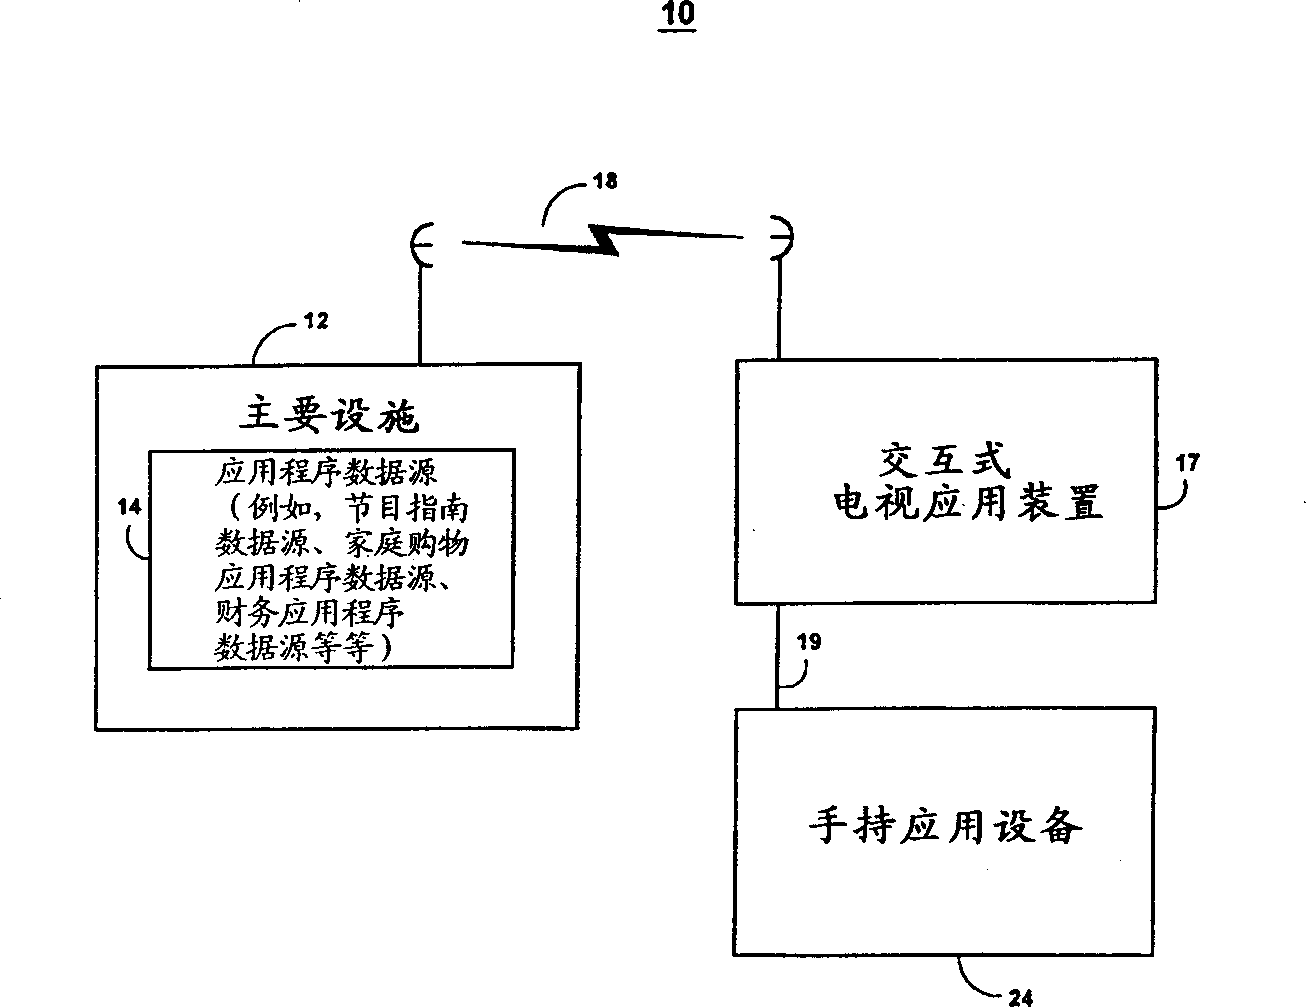 Interactive TV, application system with hand-held appliation device